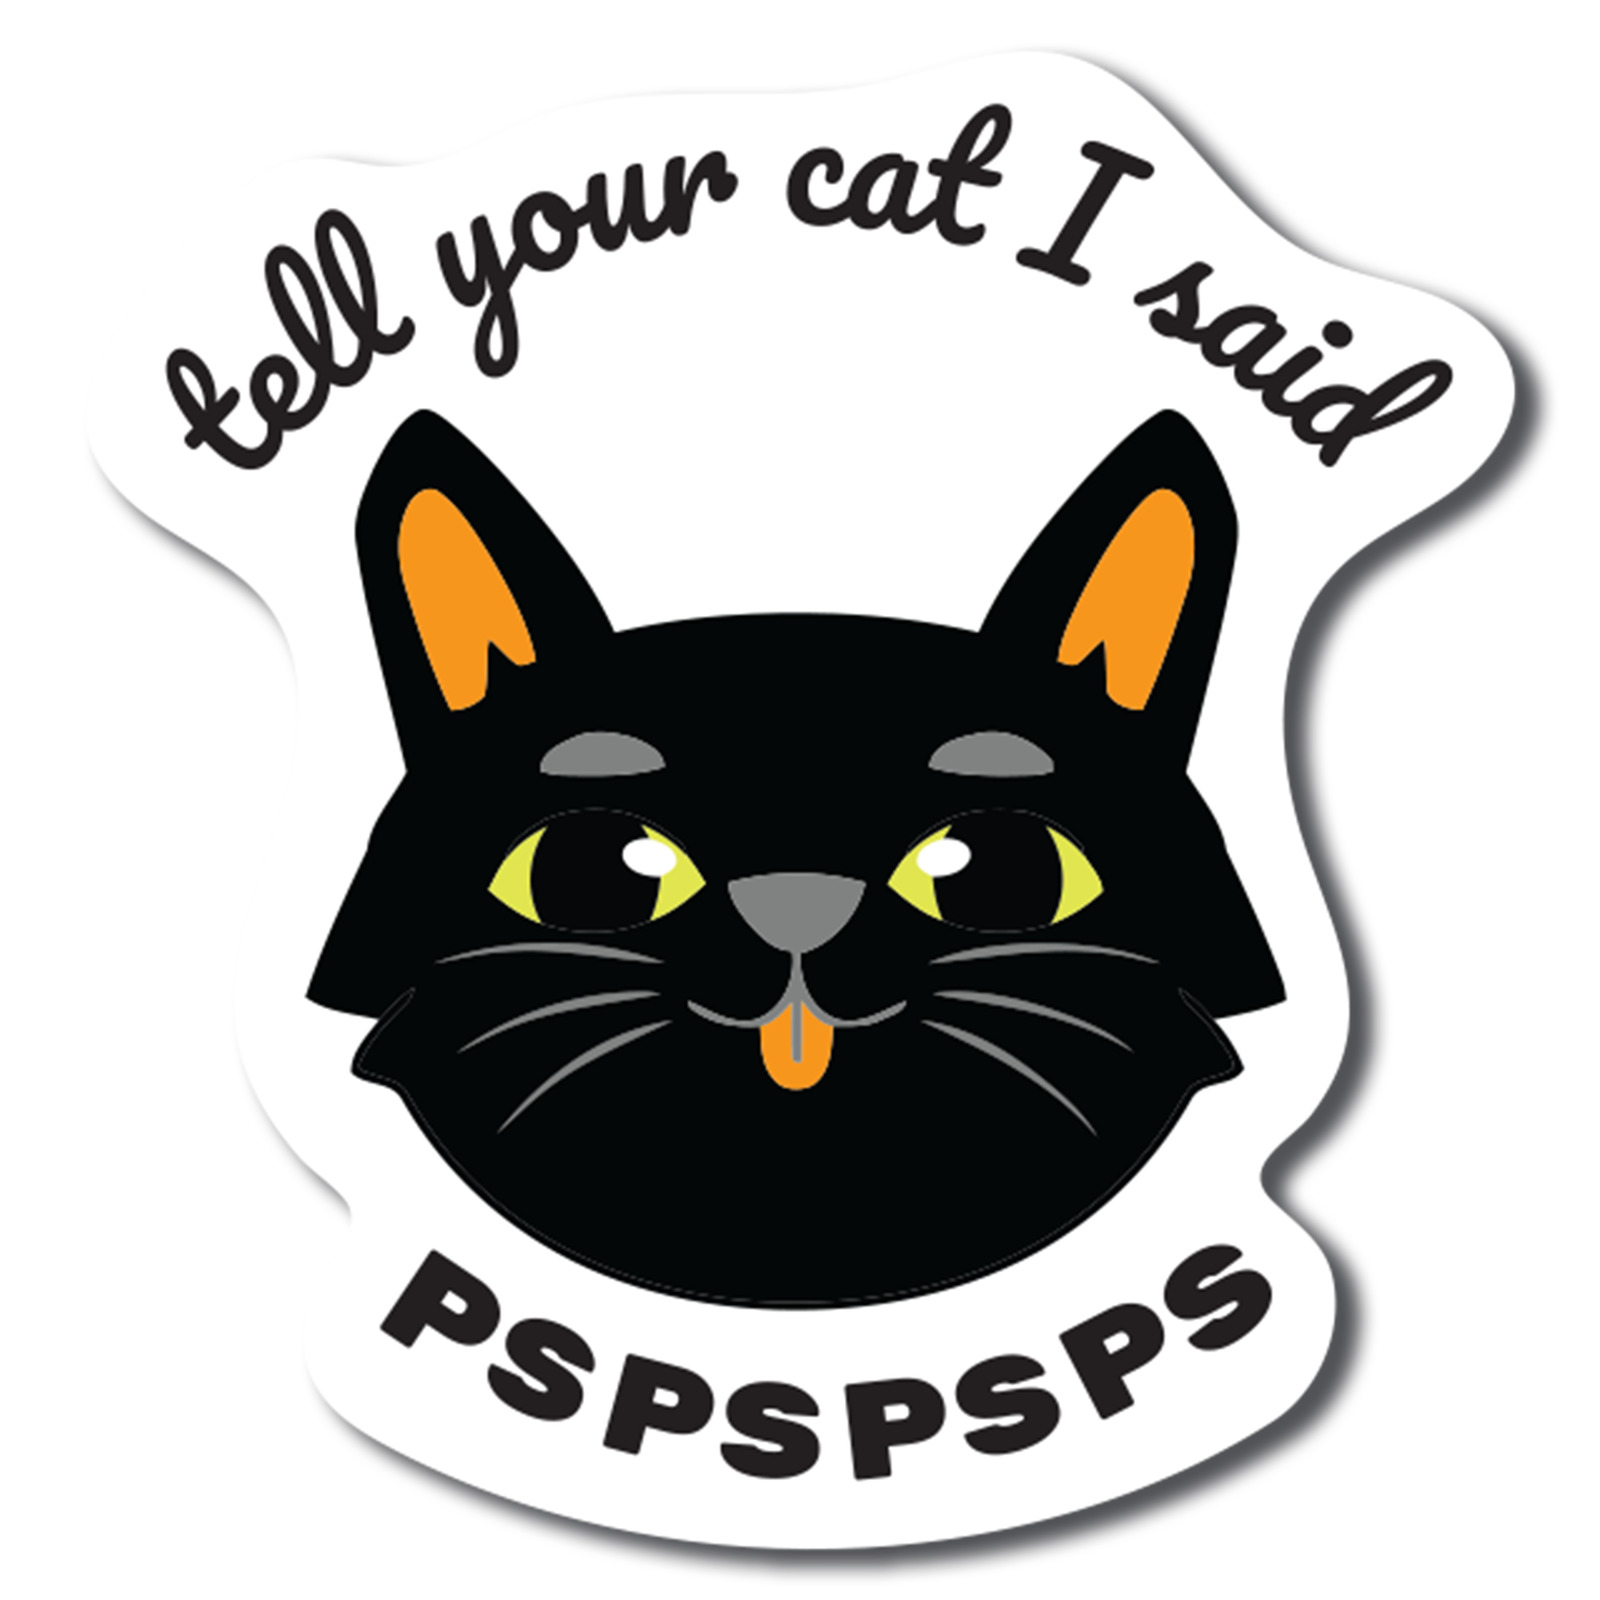 Magnet Me Up Tell Your Cat I Said PSPSPSPS Funny Cute Magnet Decal, 4.5x4.5